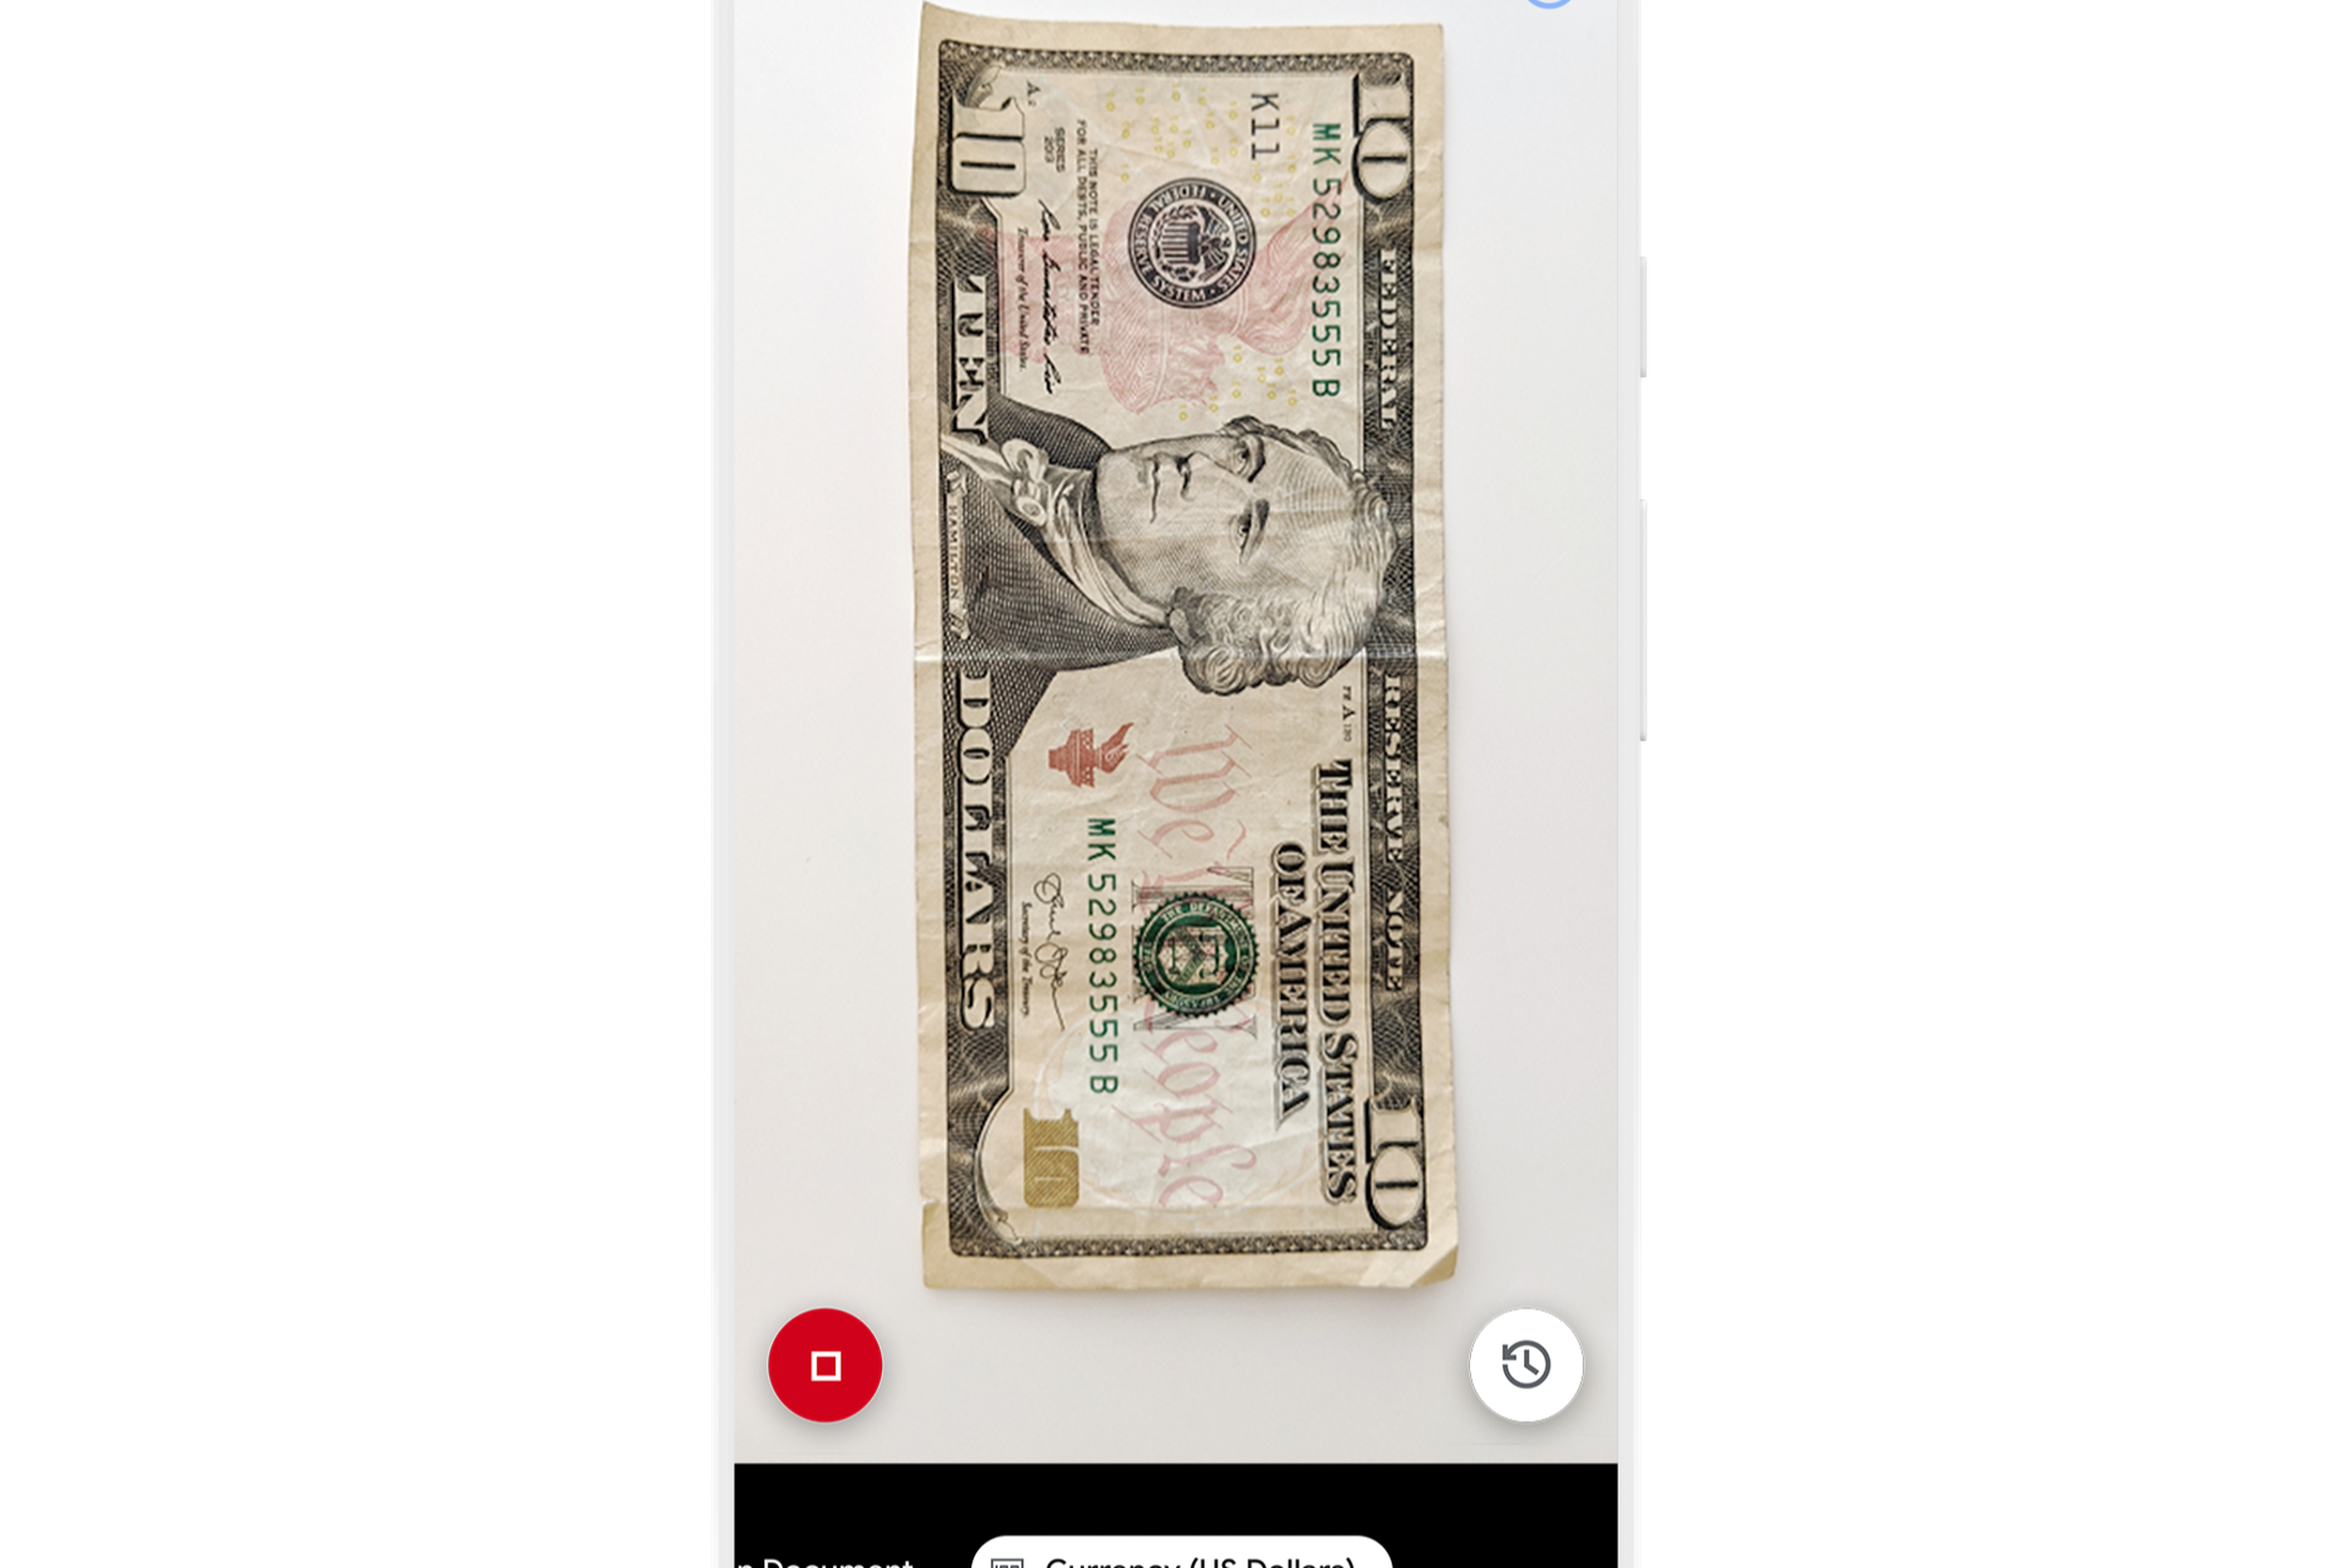 Lookout app shown on a smartphone in currency mode, displaying the front of an American ten dollar bill